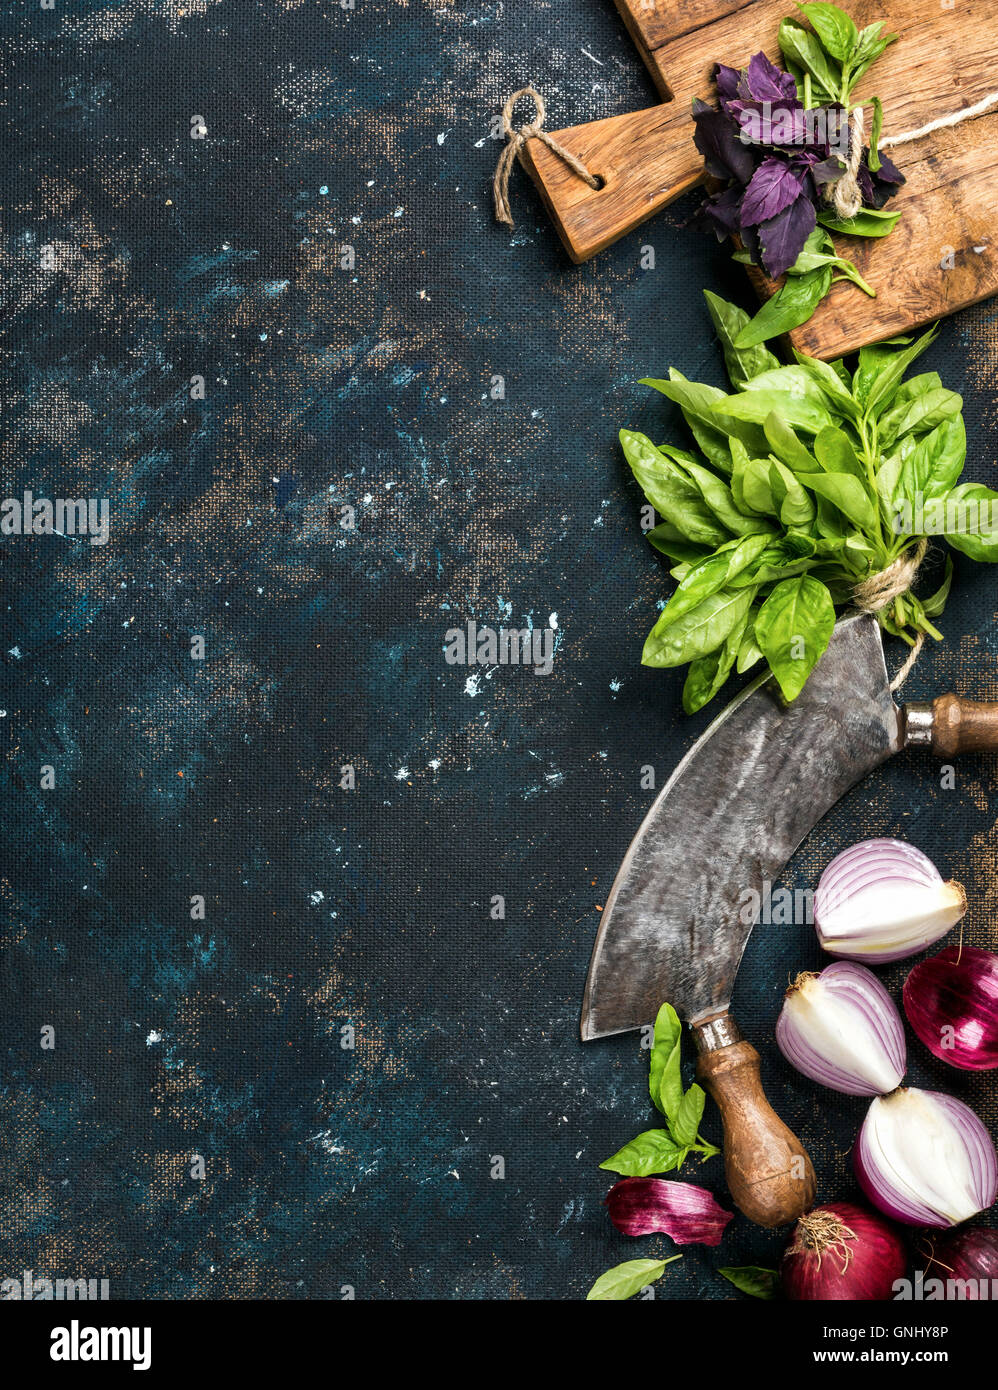 Healthy food cooking background. Fresh green and purple basil leaves, red onions and garlic, herb chopper knife and rustic cutti Stock Photo